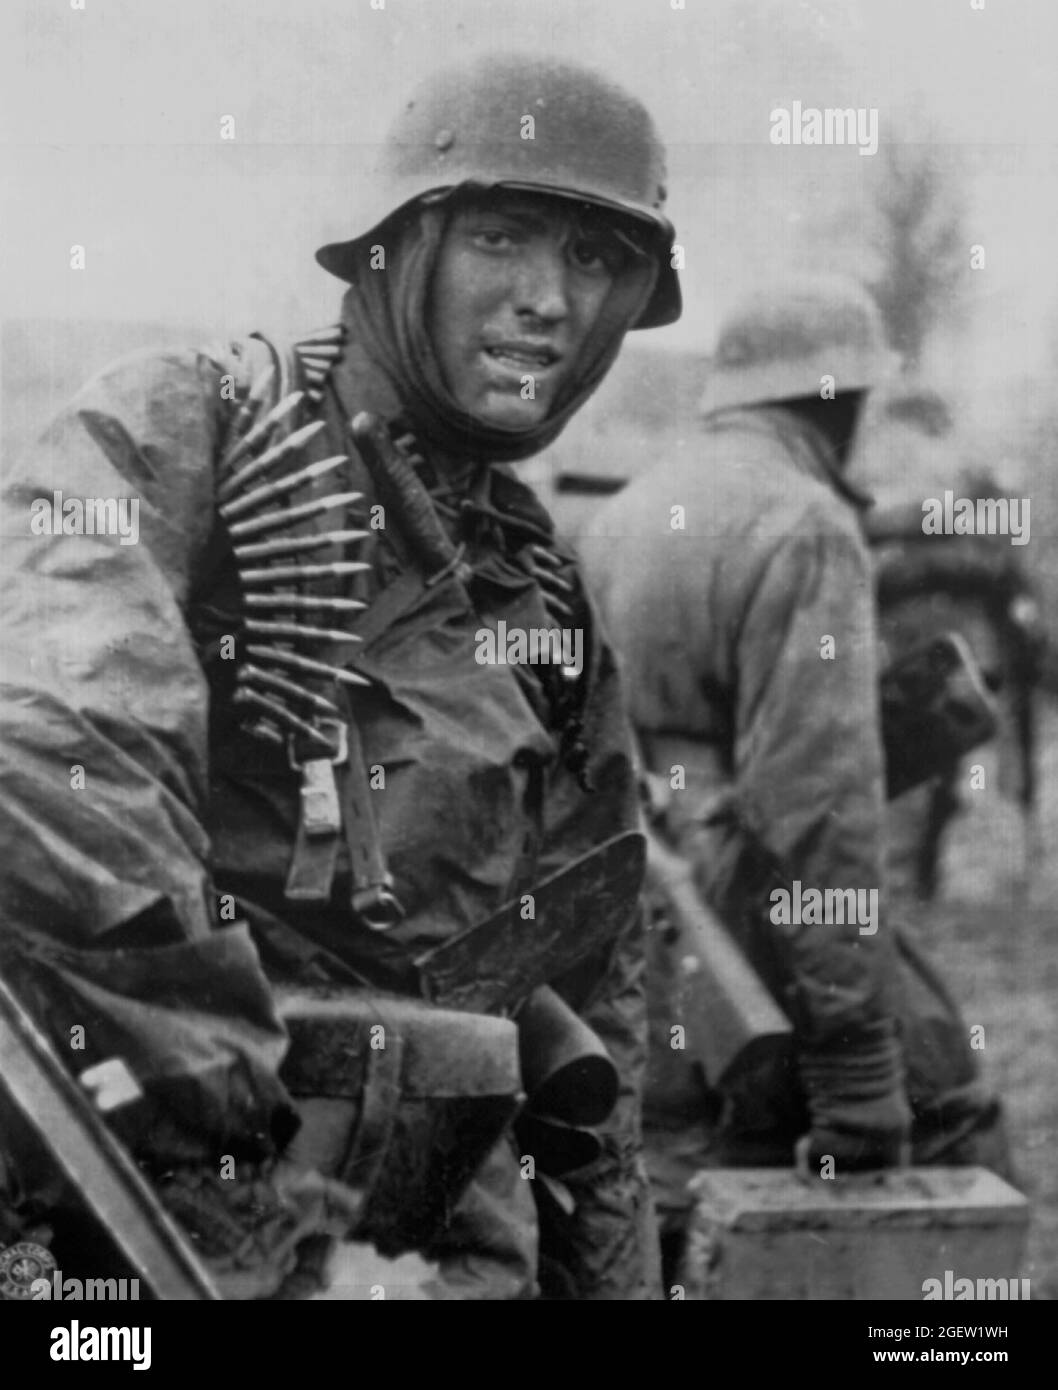 ARDENNES, BELGIUM - December 1944 - A Geman soldier, heavily armed, carries ammunition boxes forward with companion in territory taken by their counte Stock Photo